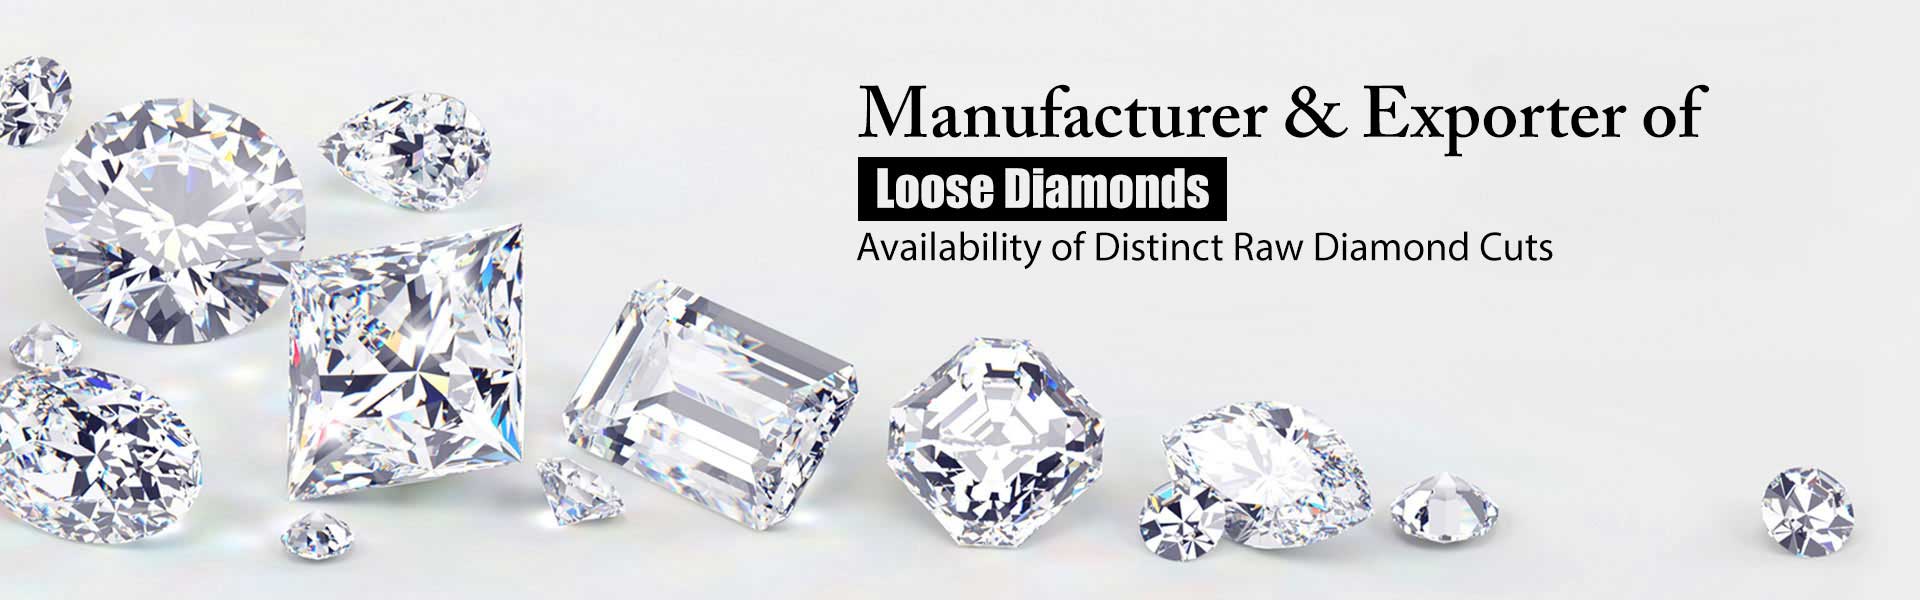  Loose Diamond  Manufacturers in The Hague